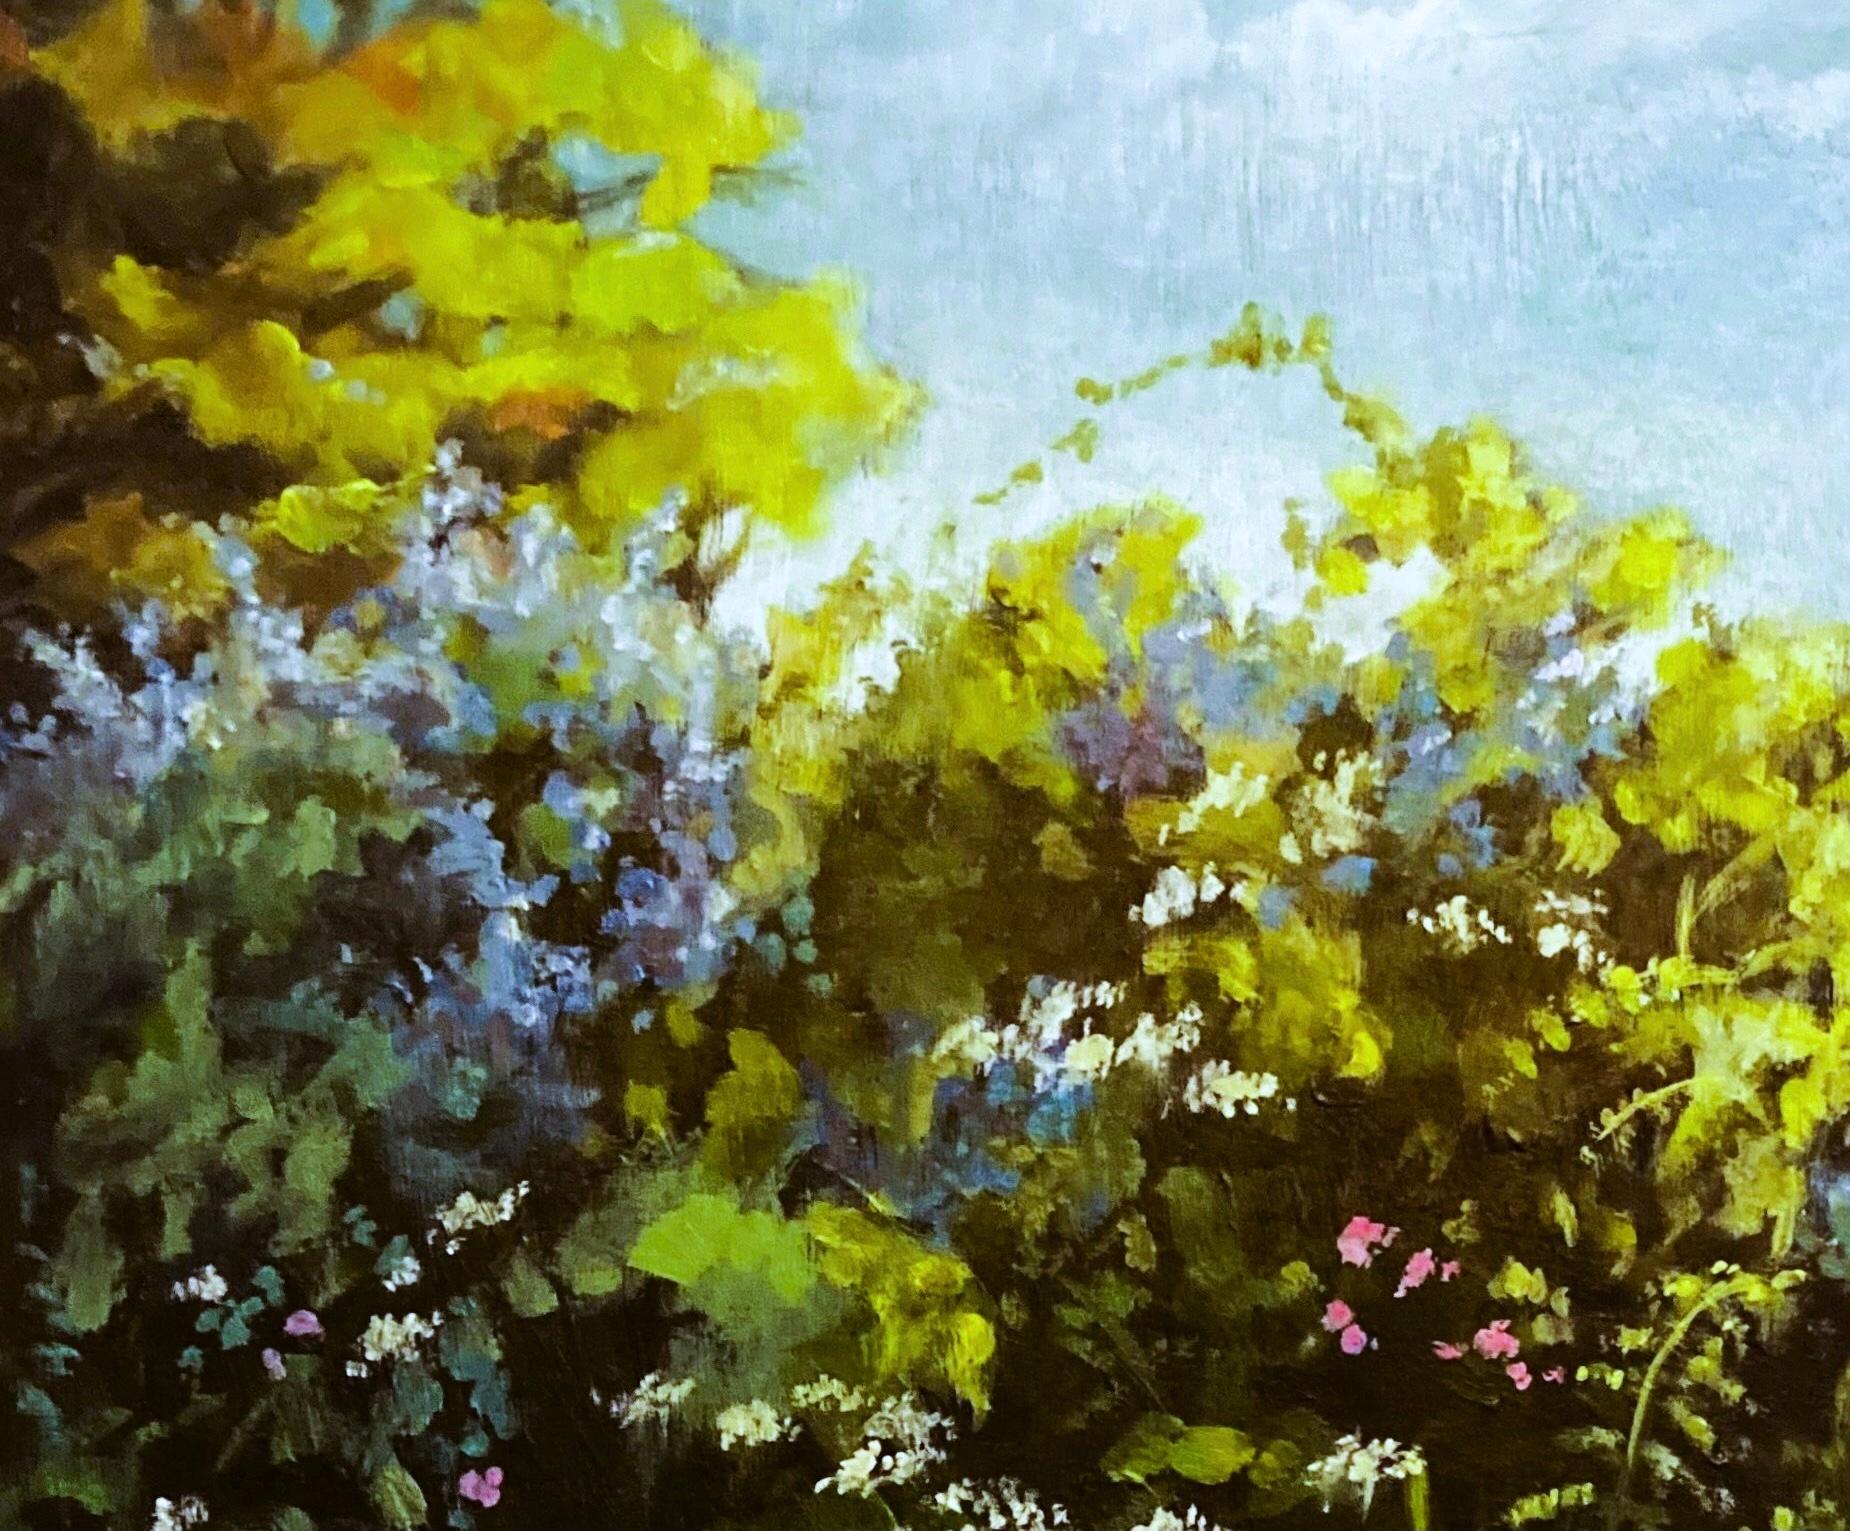 New Forest - Wild Garden Hedgerow, landscape, nature, floral - Black Landscape Painting by Nicky Bramble